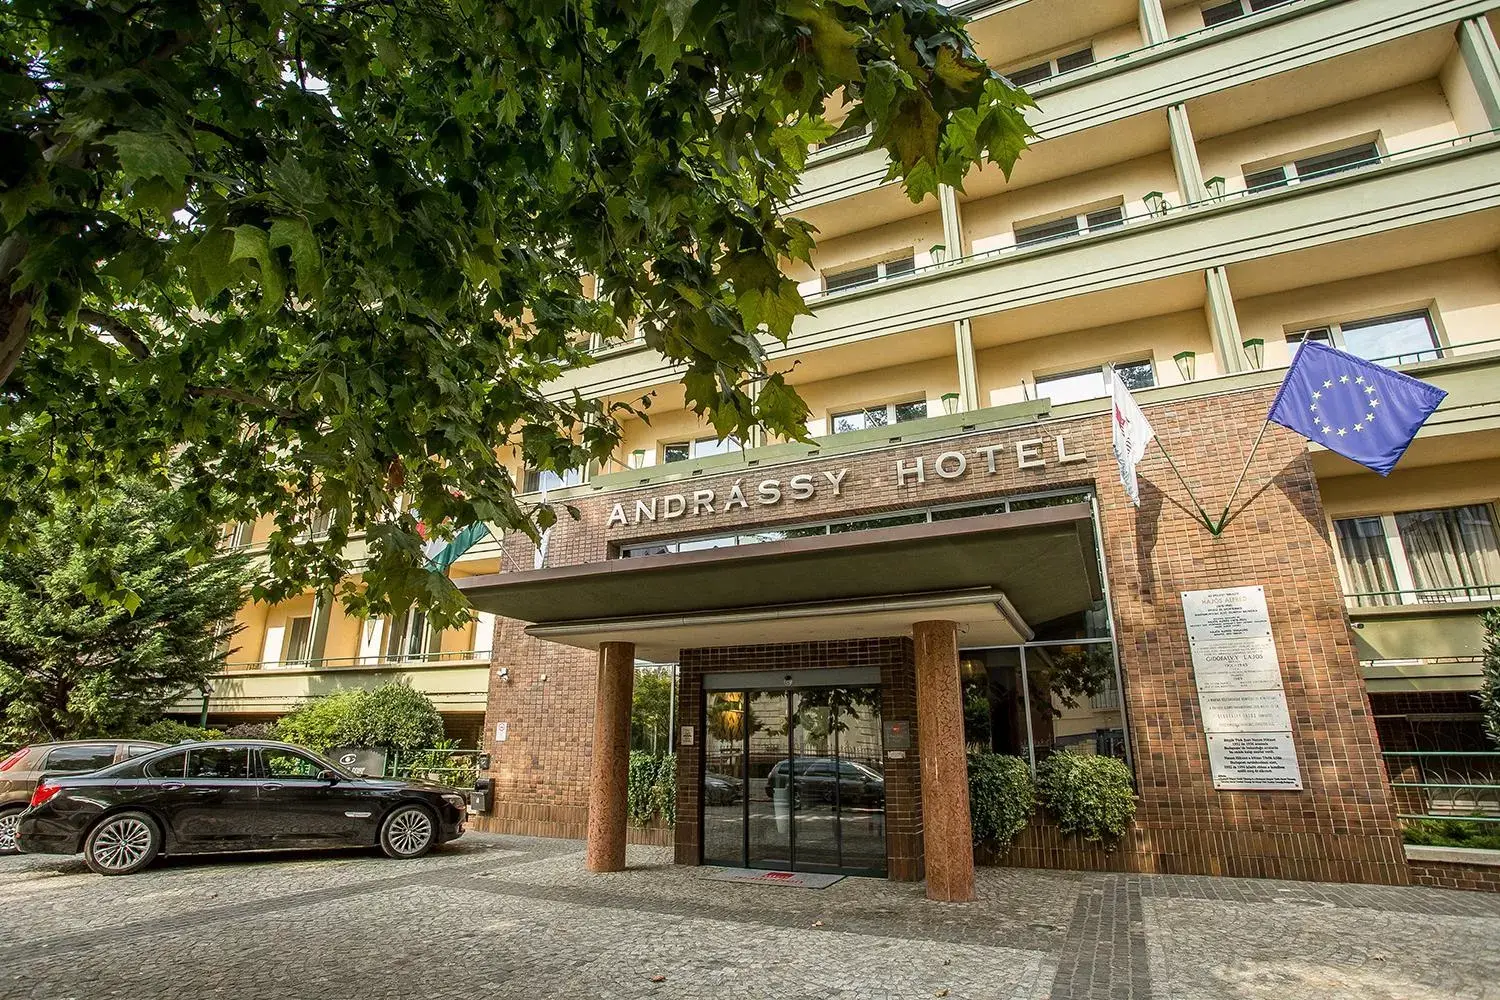 Property Building in Mamaison Hotel Andrassy Budapest